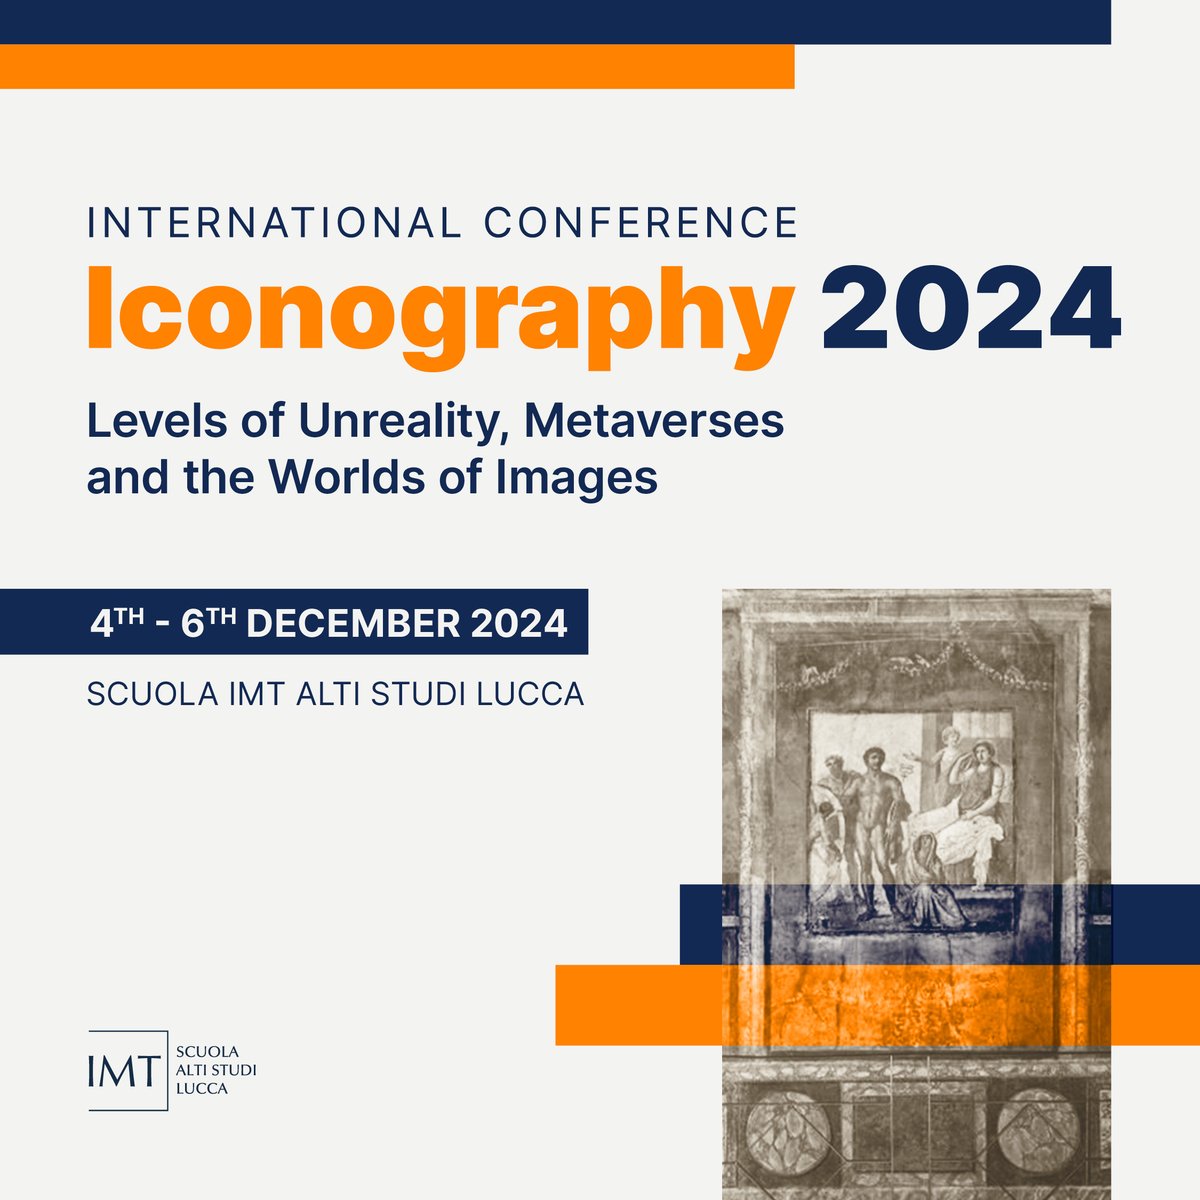 The Research Unit @lynxlucca of the #IMTSchool and the Department of #CulturalHeritage of the @UniPadova are organizing the 5th edition of the International #conference 'Iconography'. 📄The #callforpapers is now open! Deadline⏳June 16th. More info➡️tinyurl.com/2e9ab56c